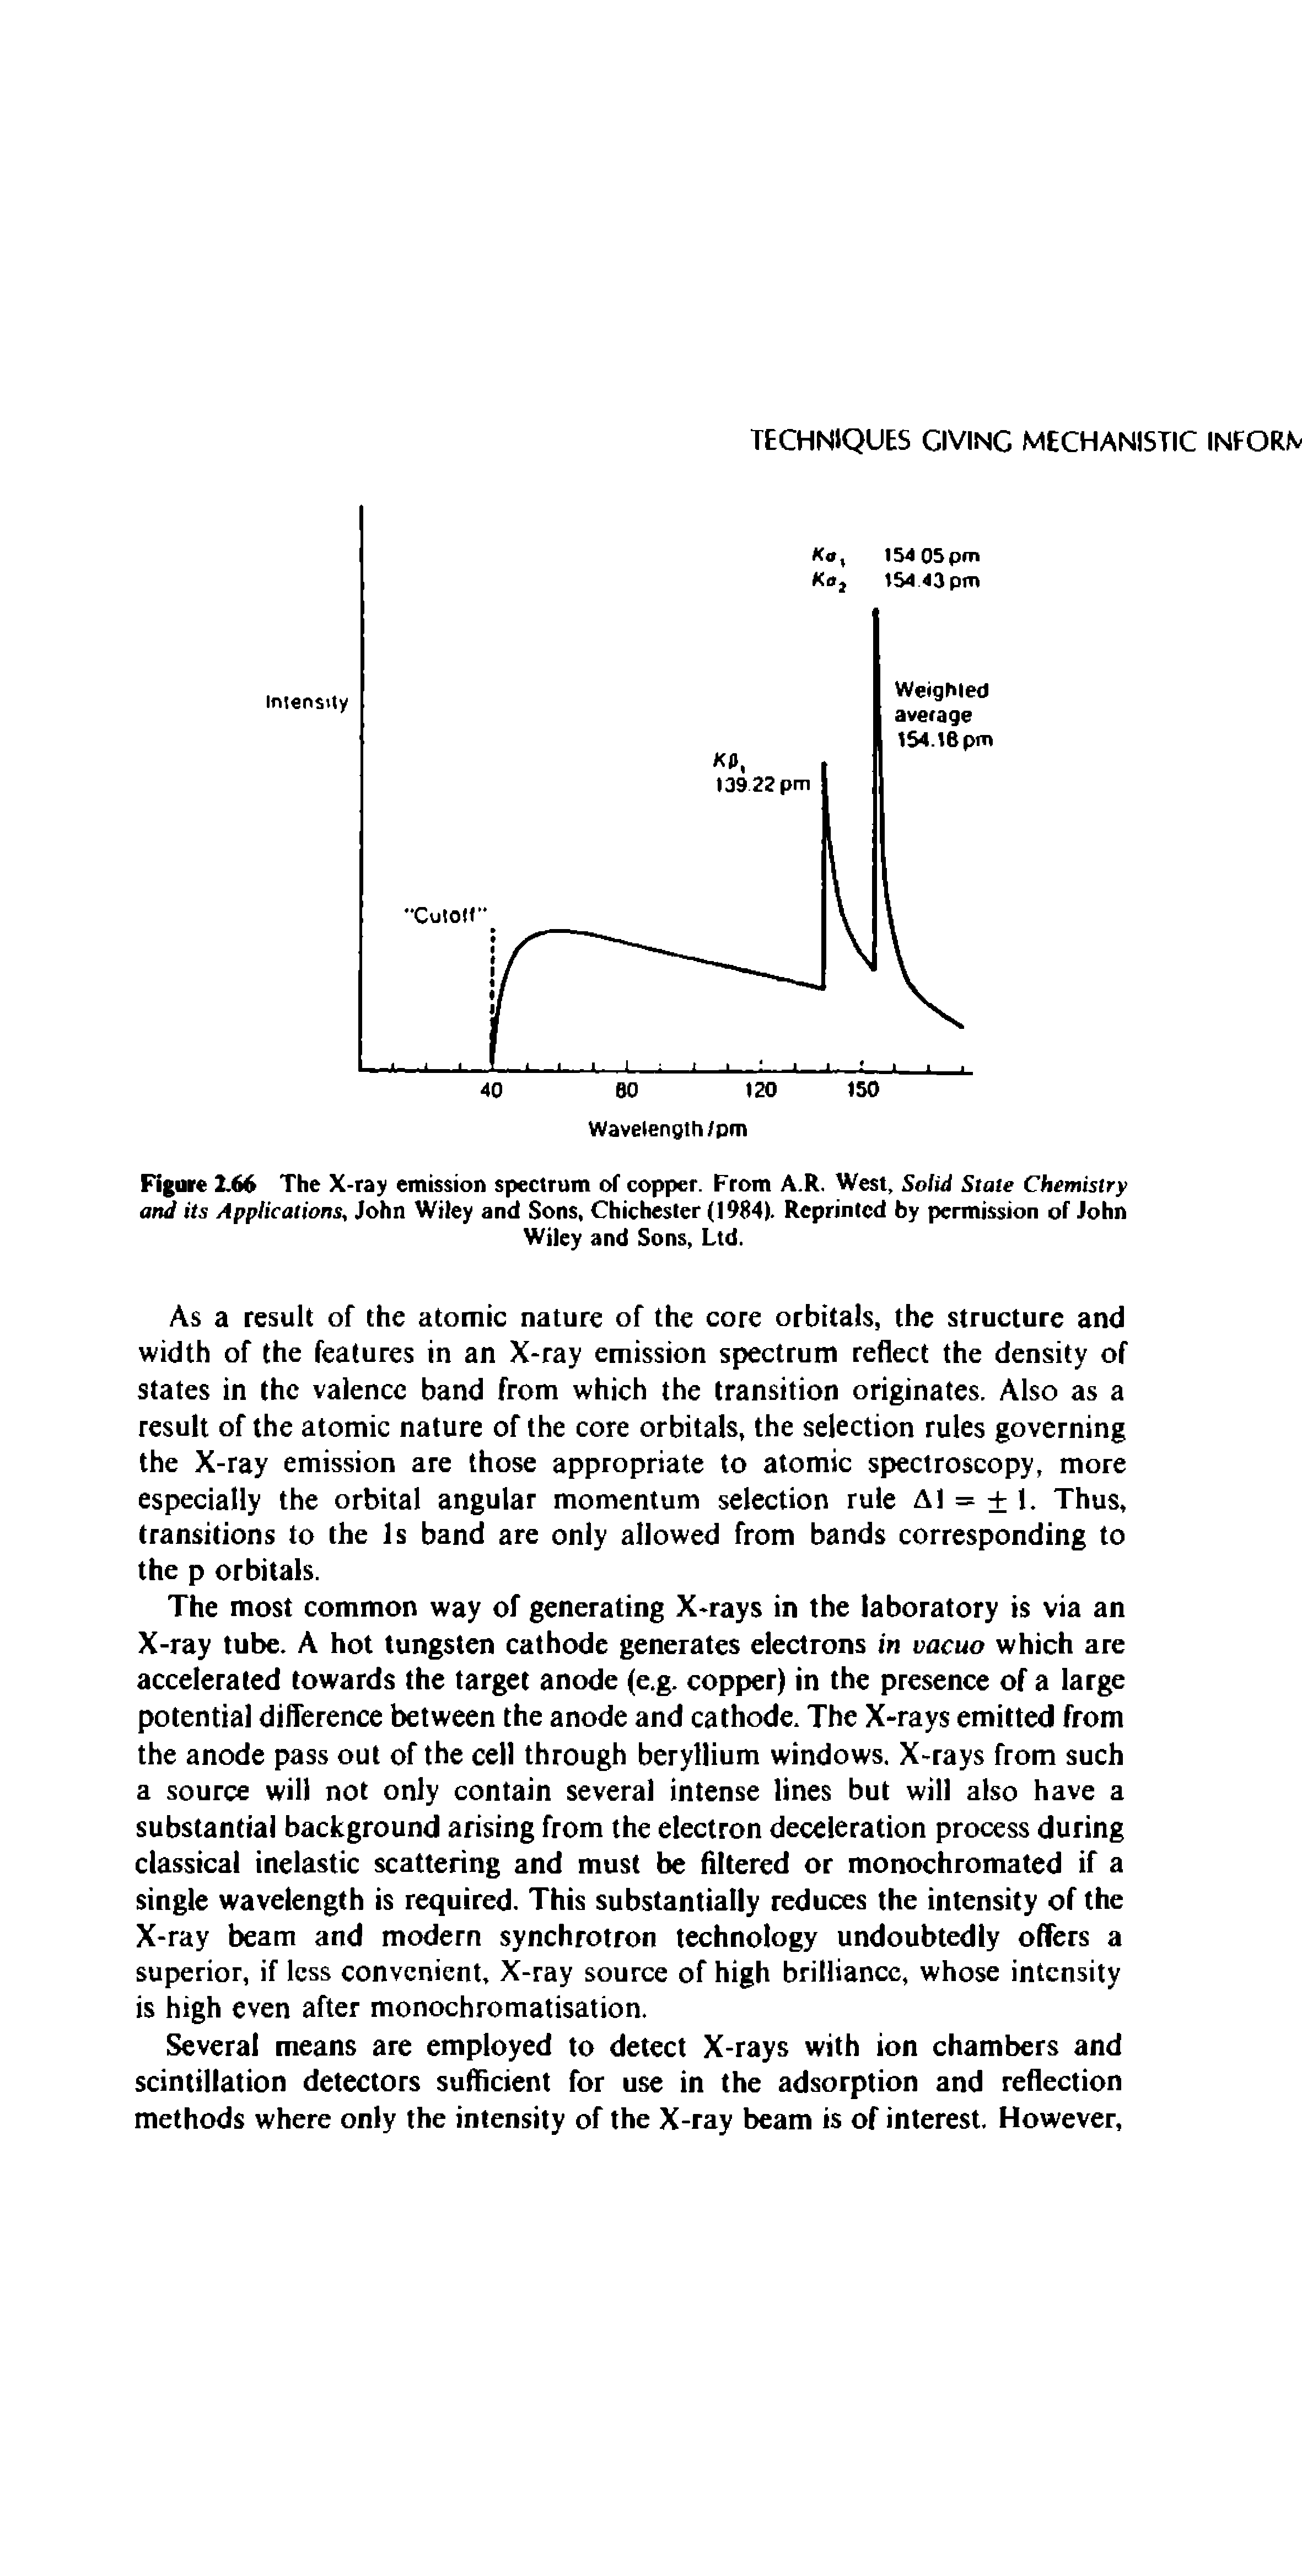 Figure 2.66 The X-ray emission spectrum of copper. From A.R. West, Solid State Chemistry and its Applications, John Wiley and Sons, Chichester (1984). Reprinted by permission of John...